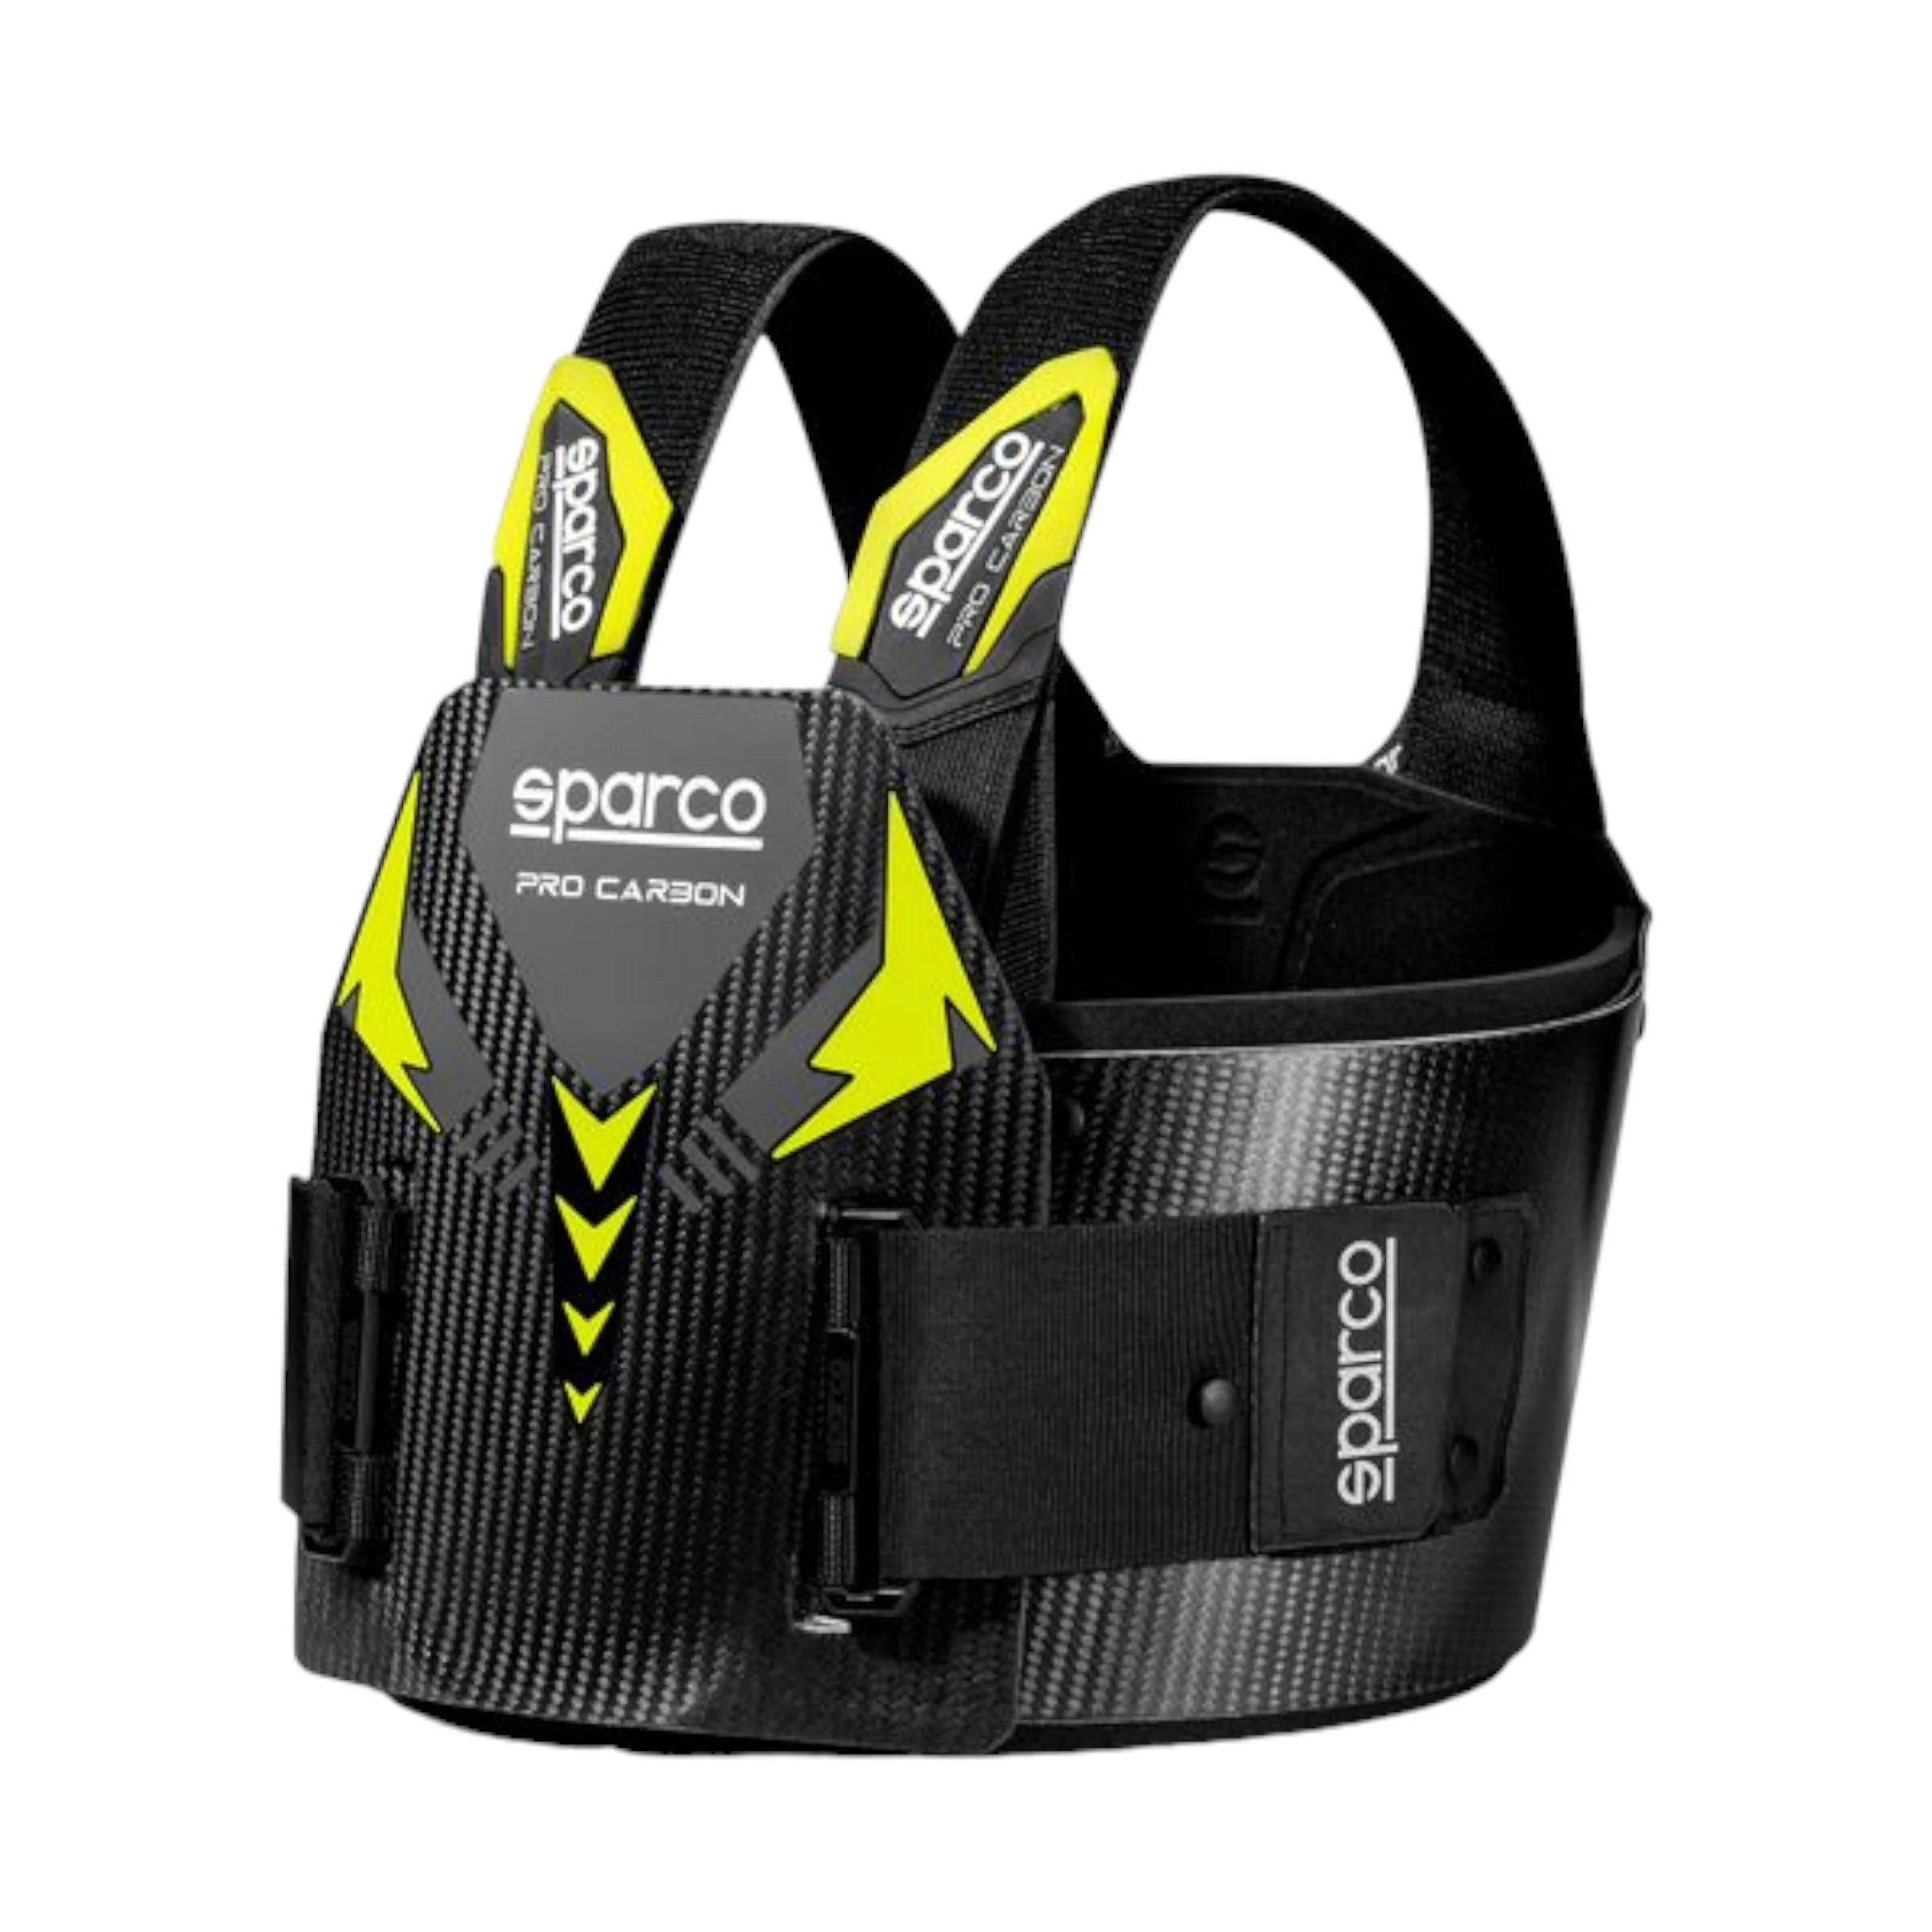 Sparco Pro Carbon Rib Protector